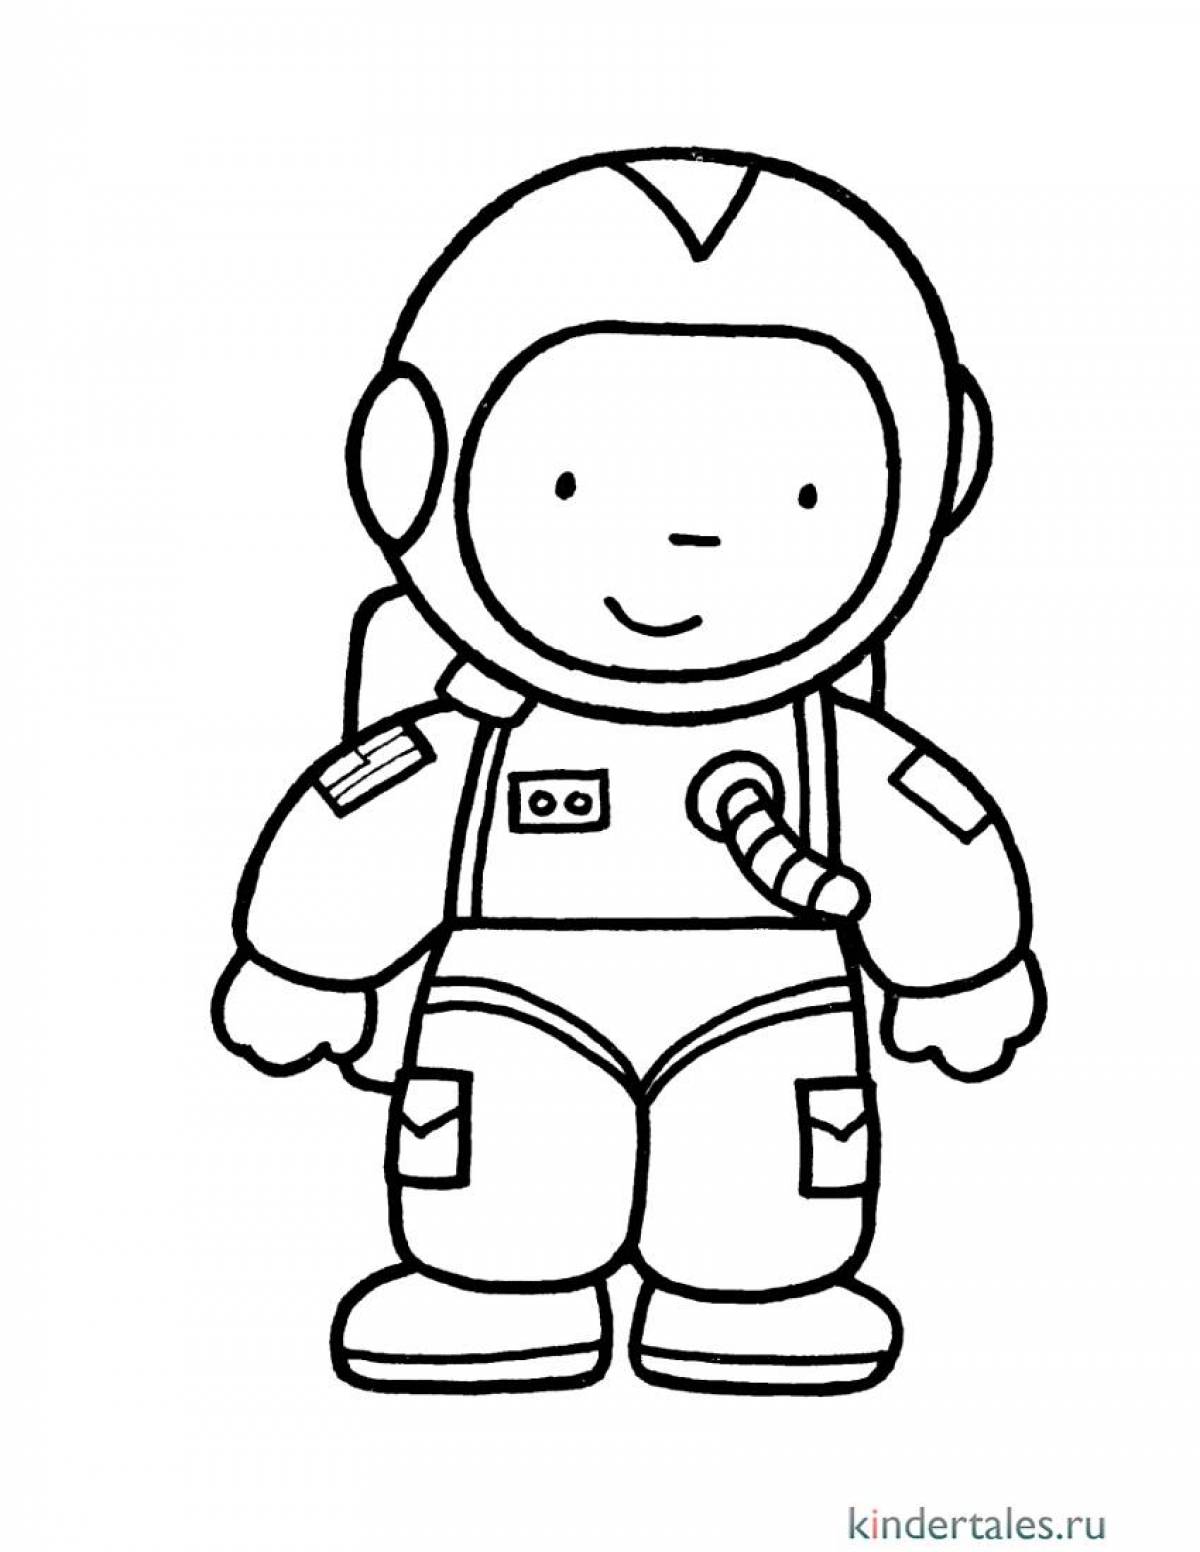 Dynamic astronaut coloring page